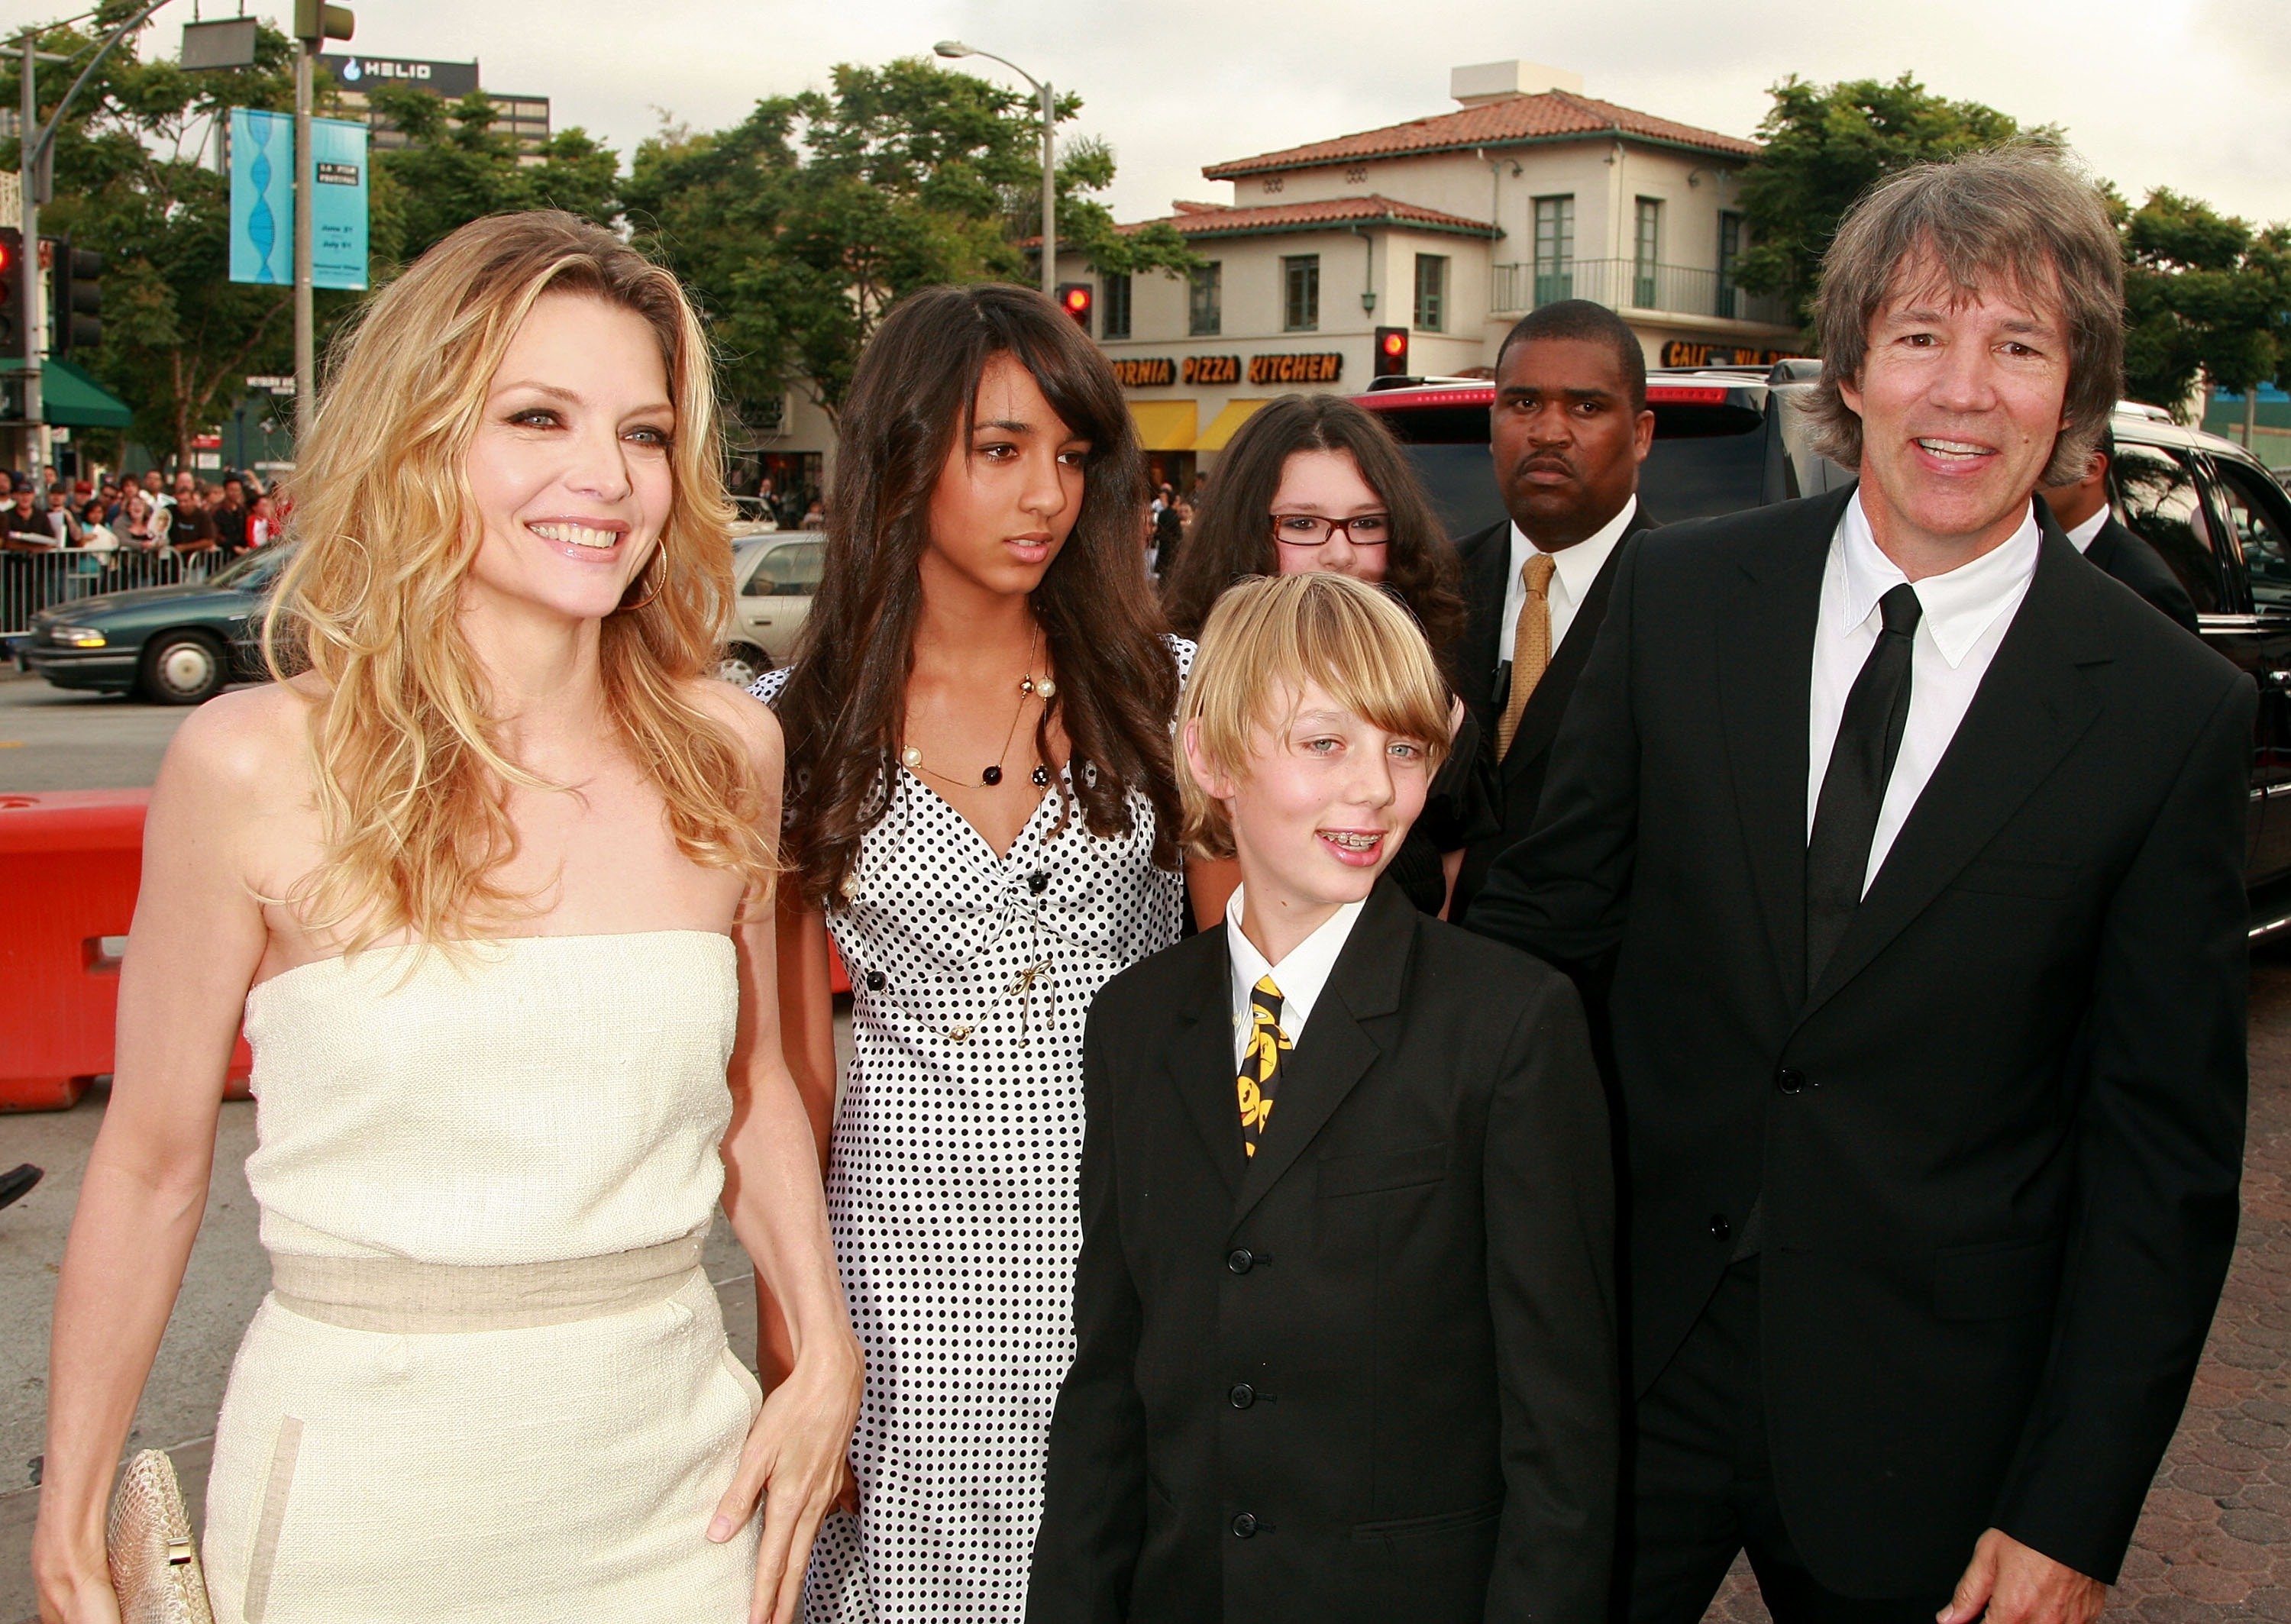 Michelle Pfeiffer, daughter Claudia, son John Henry, and husband David E. Kelley arrive to the Los Angeles premiere of New Line Cinema's "Hairspray" on July 10, 2007, in Westwood, California | Source: Getty Images